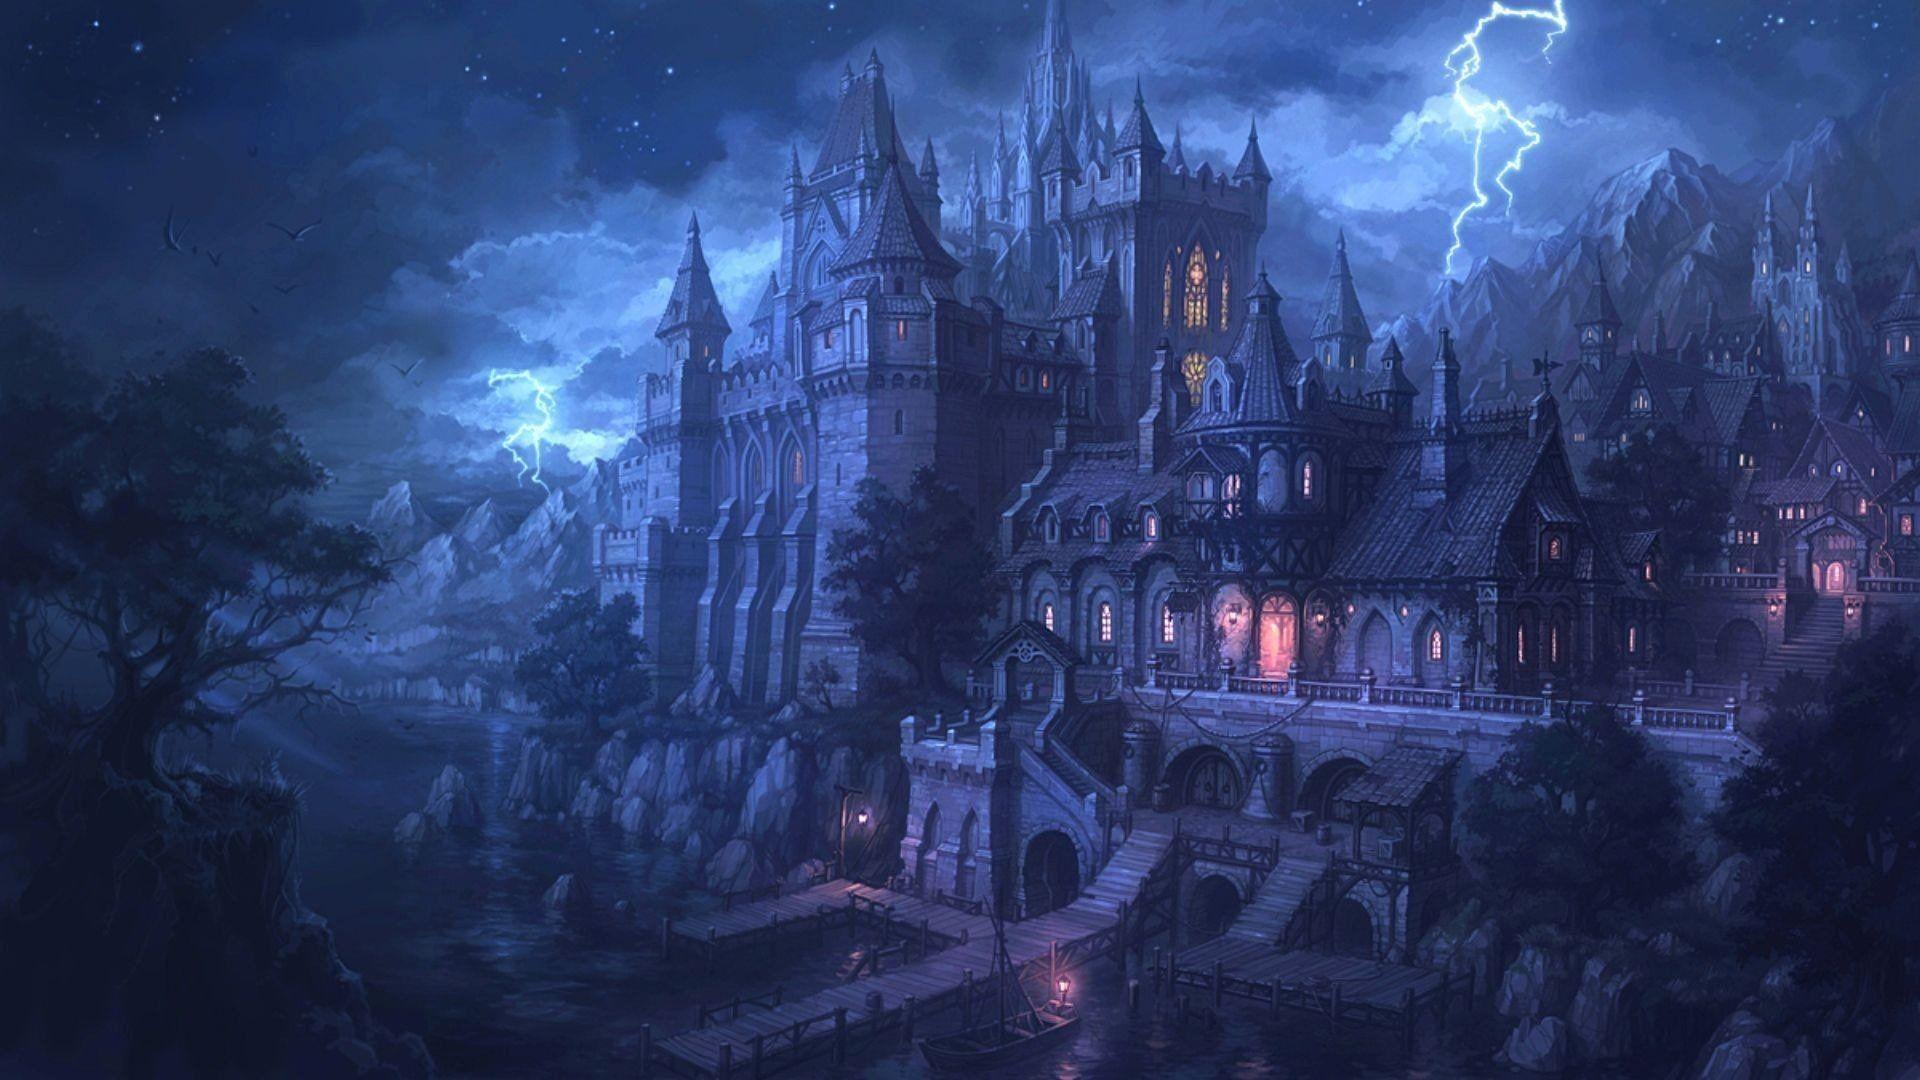 Anime Castle Background Images HD Pictures and Wallpaper For Free Download   Pngtree